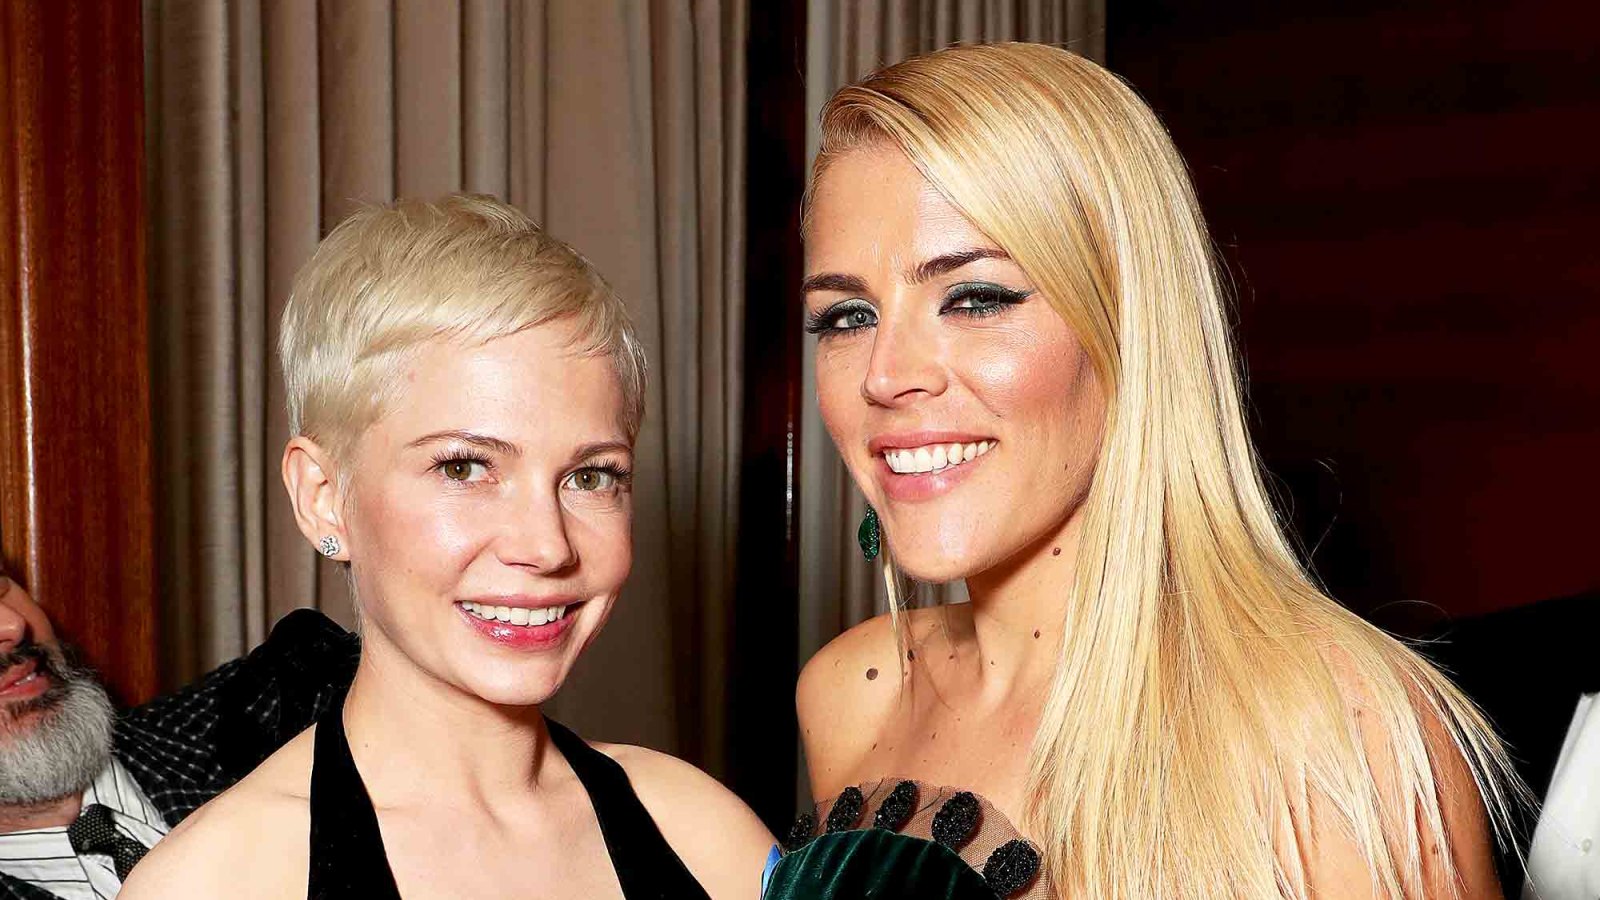 Michelle Williams and Busy Philipps attend the Amazon Studios Oscar Celebration at Delilah on February 26, 2017 in West Hollywood, California.